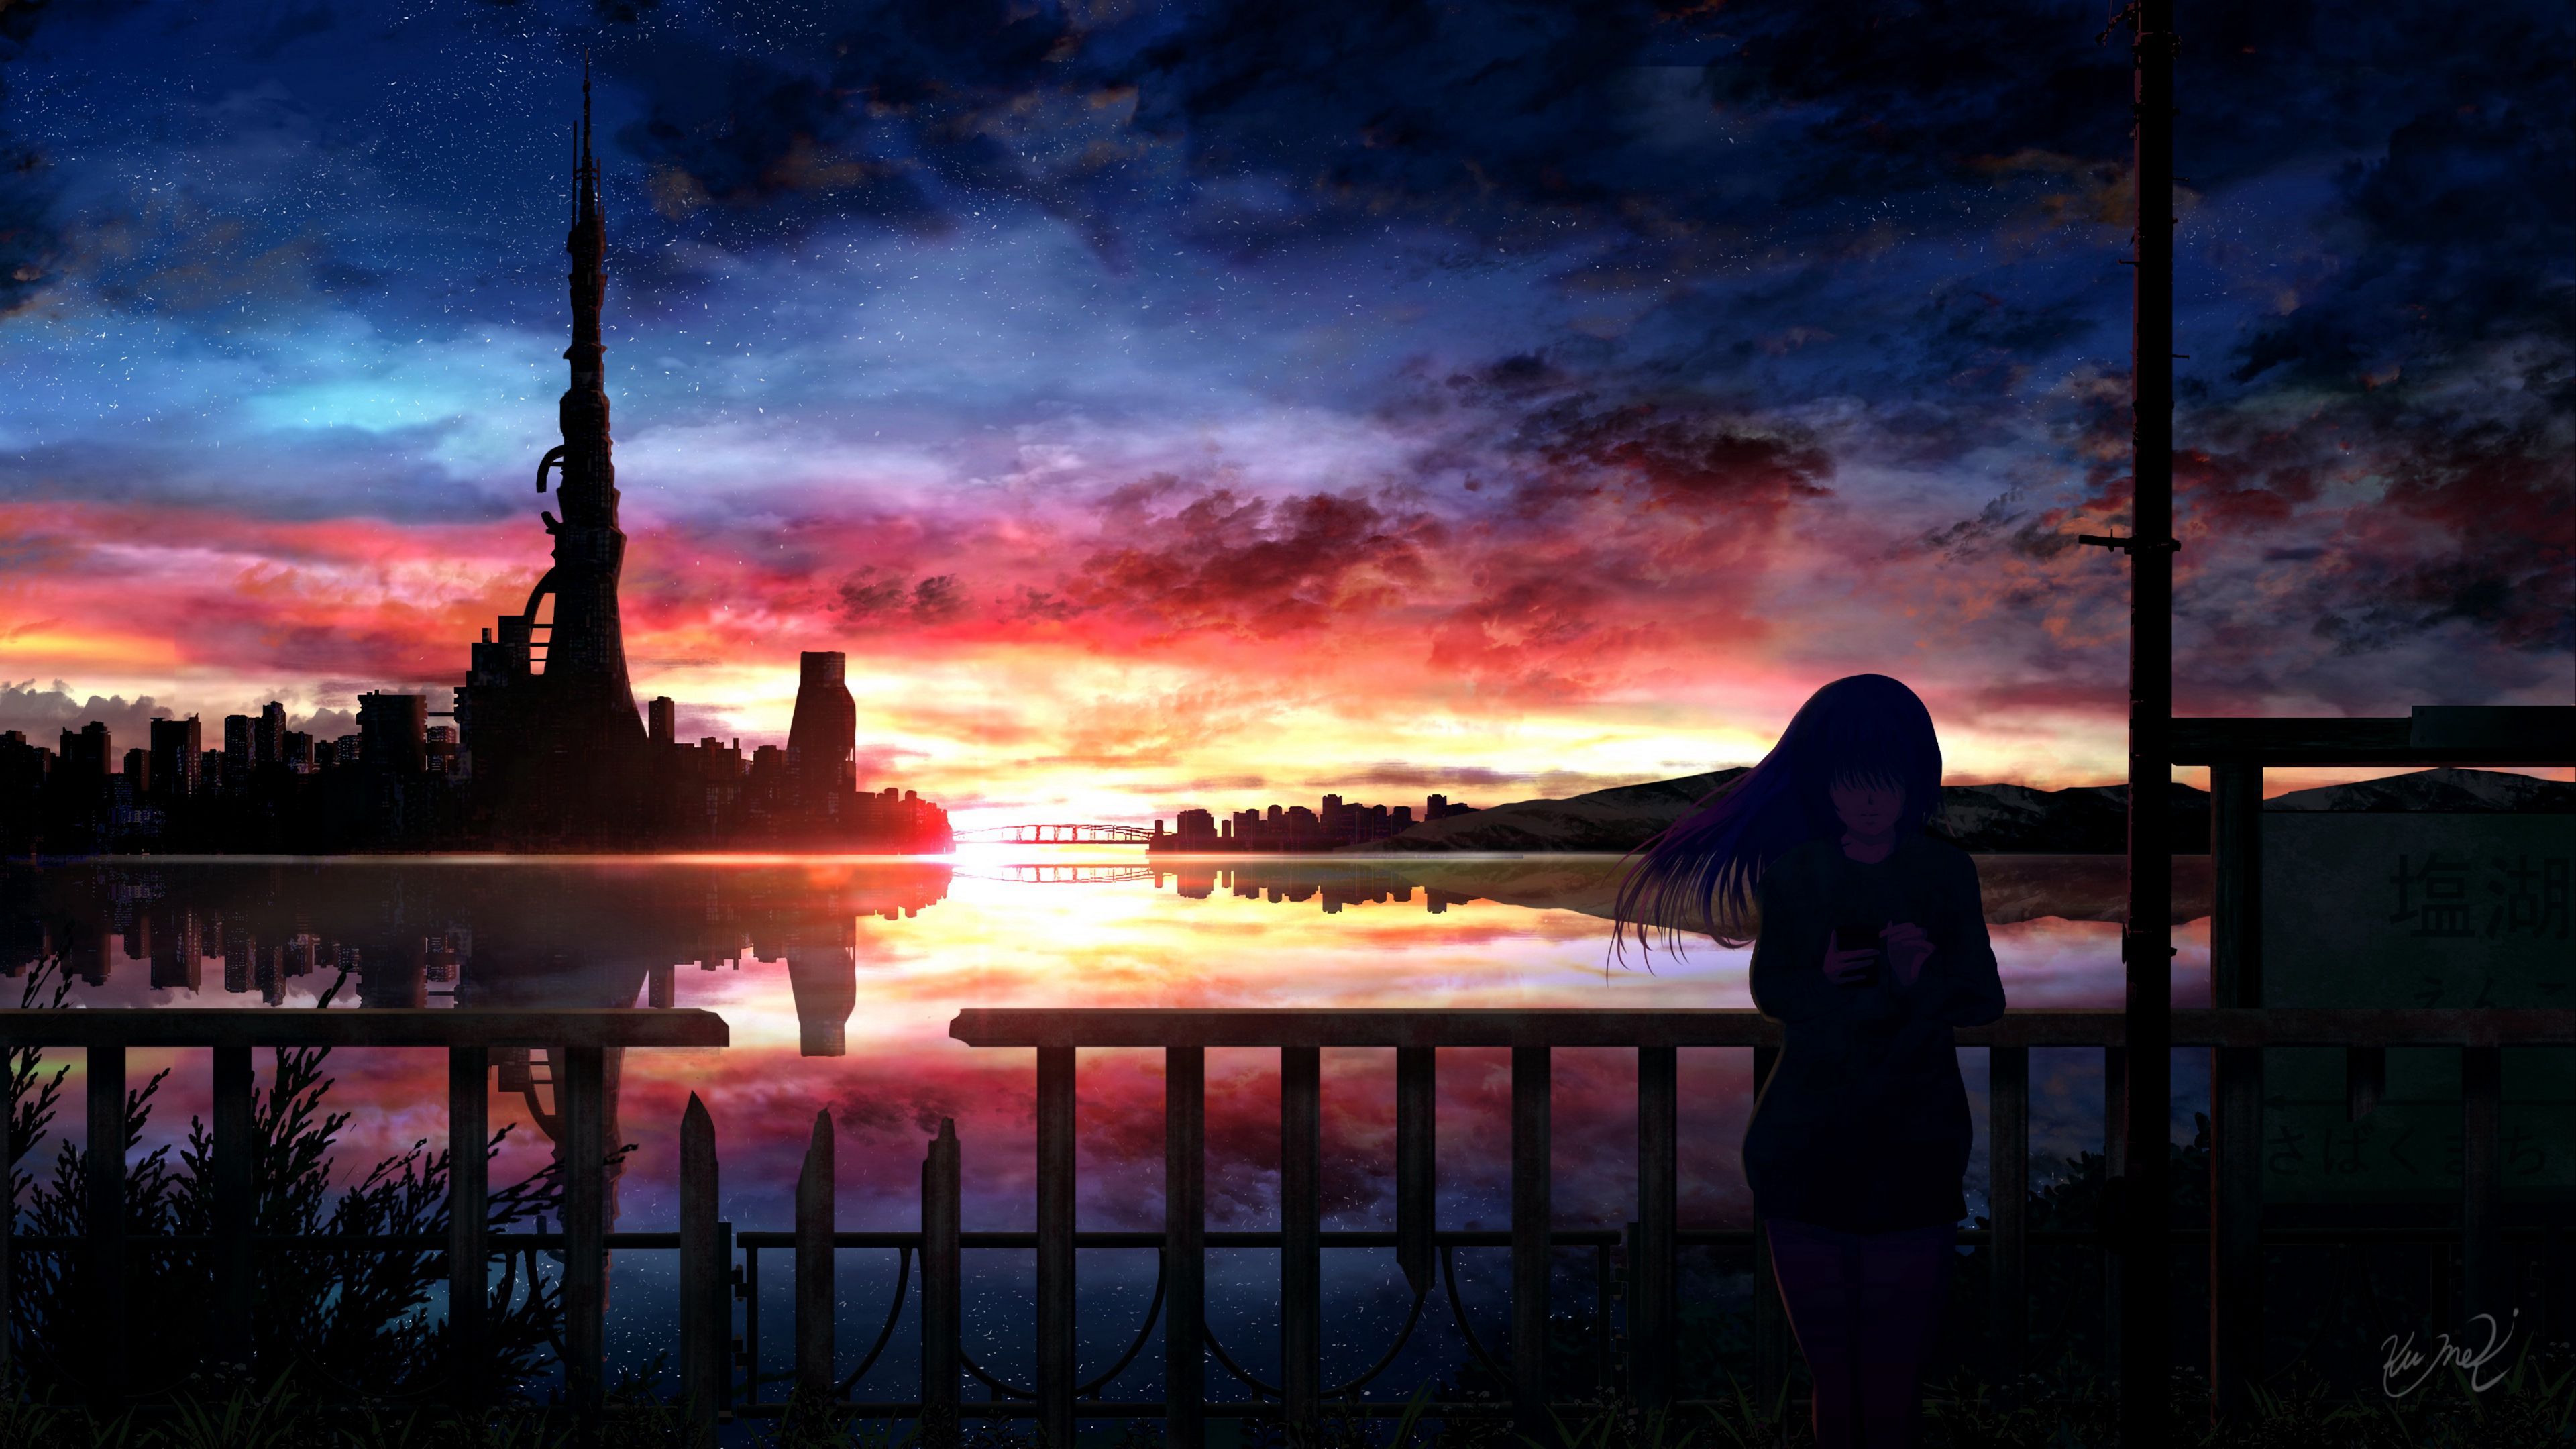 Download wallpaper 3840x2160 silhouette, night, starry sky, girl, anime 4k uhd 16:9 HD background